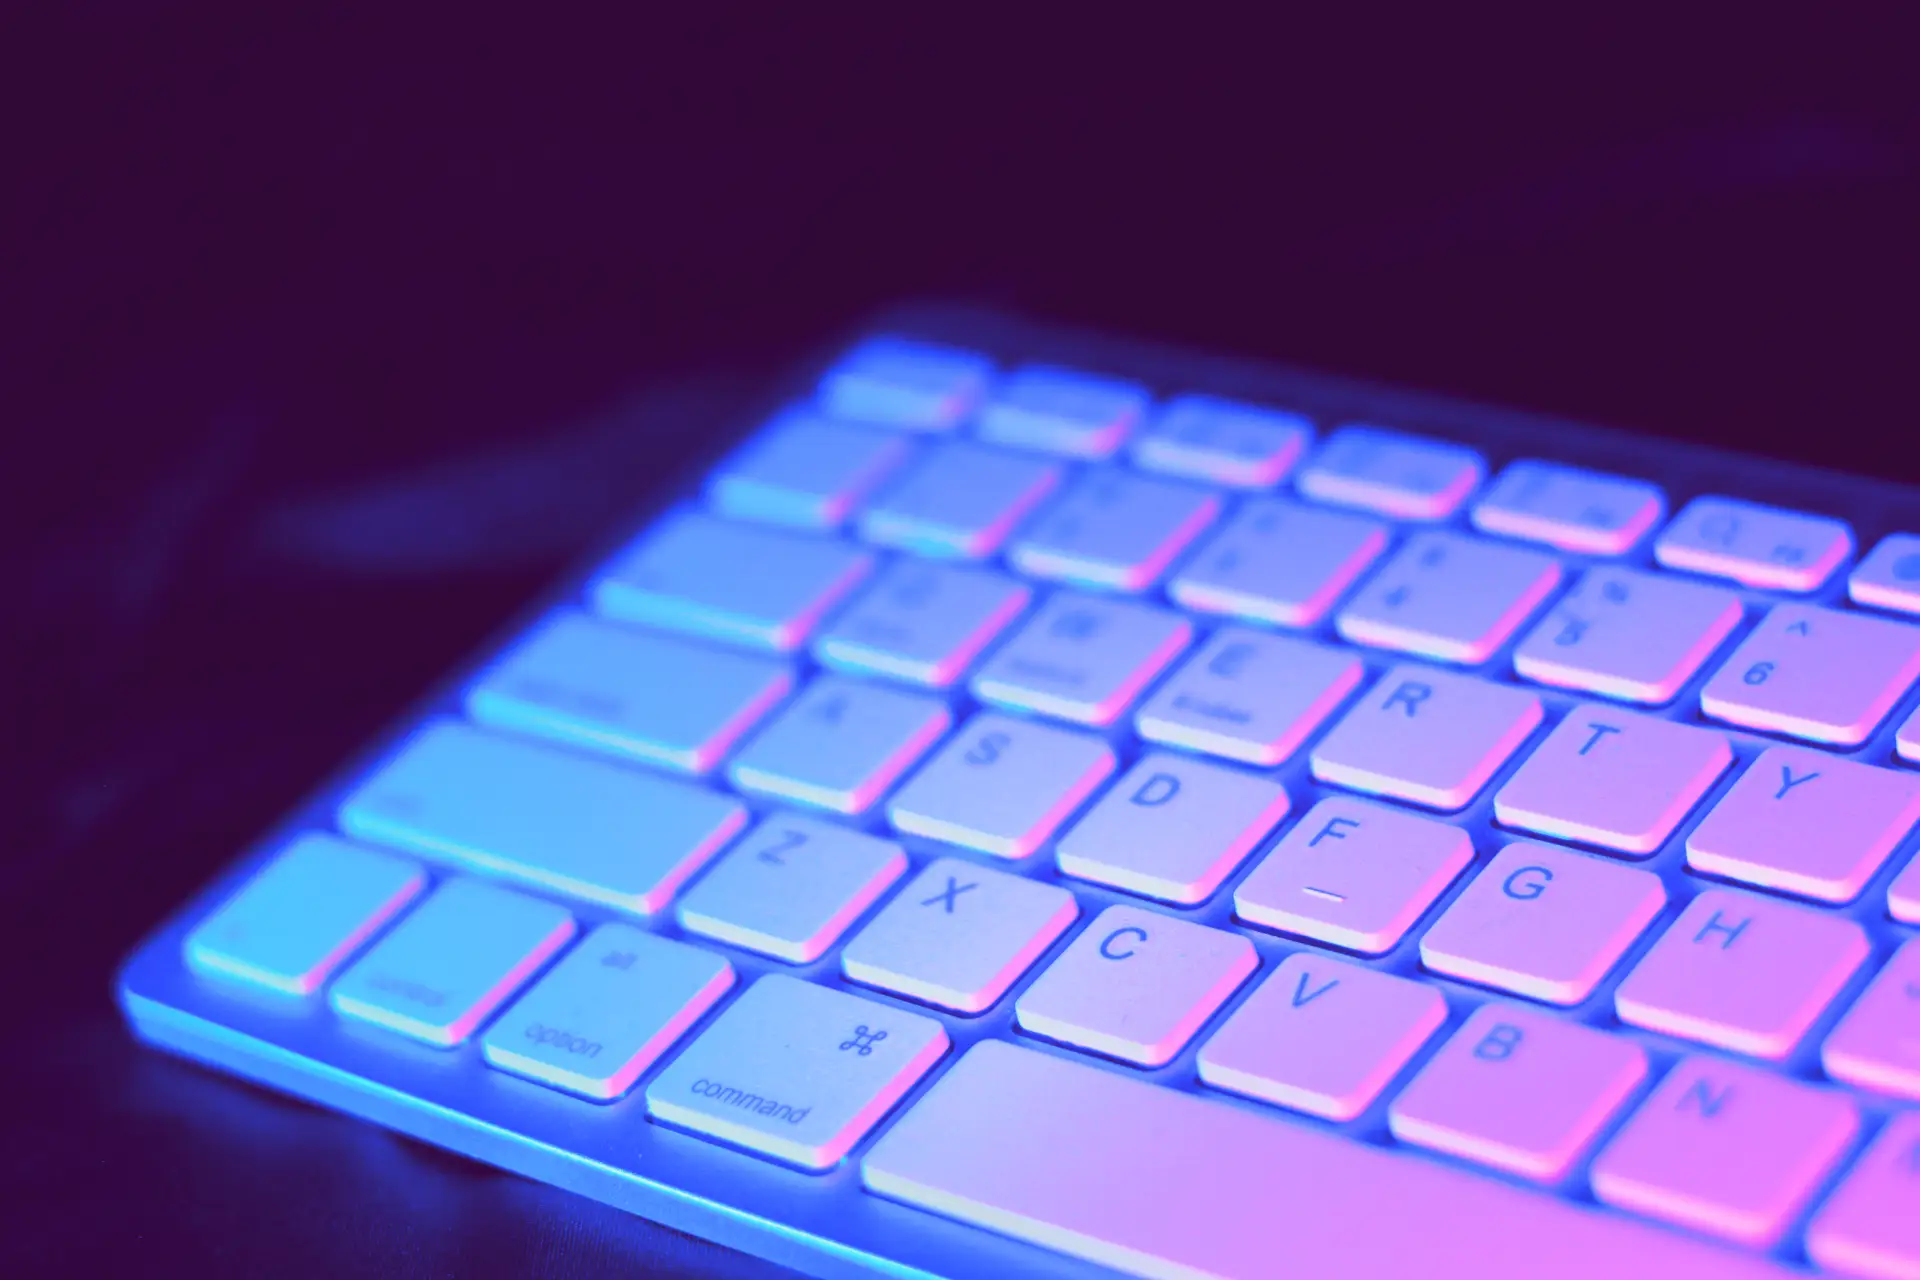 Neon pink and blue light on a white keyboard